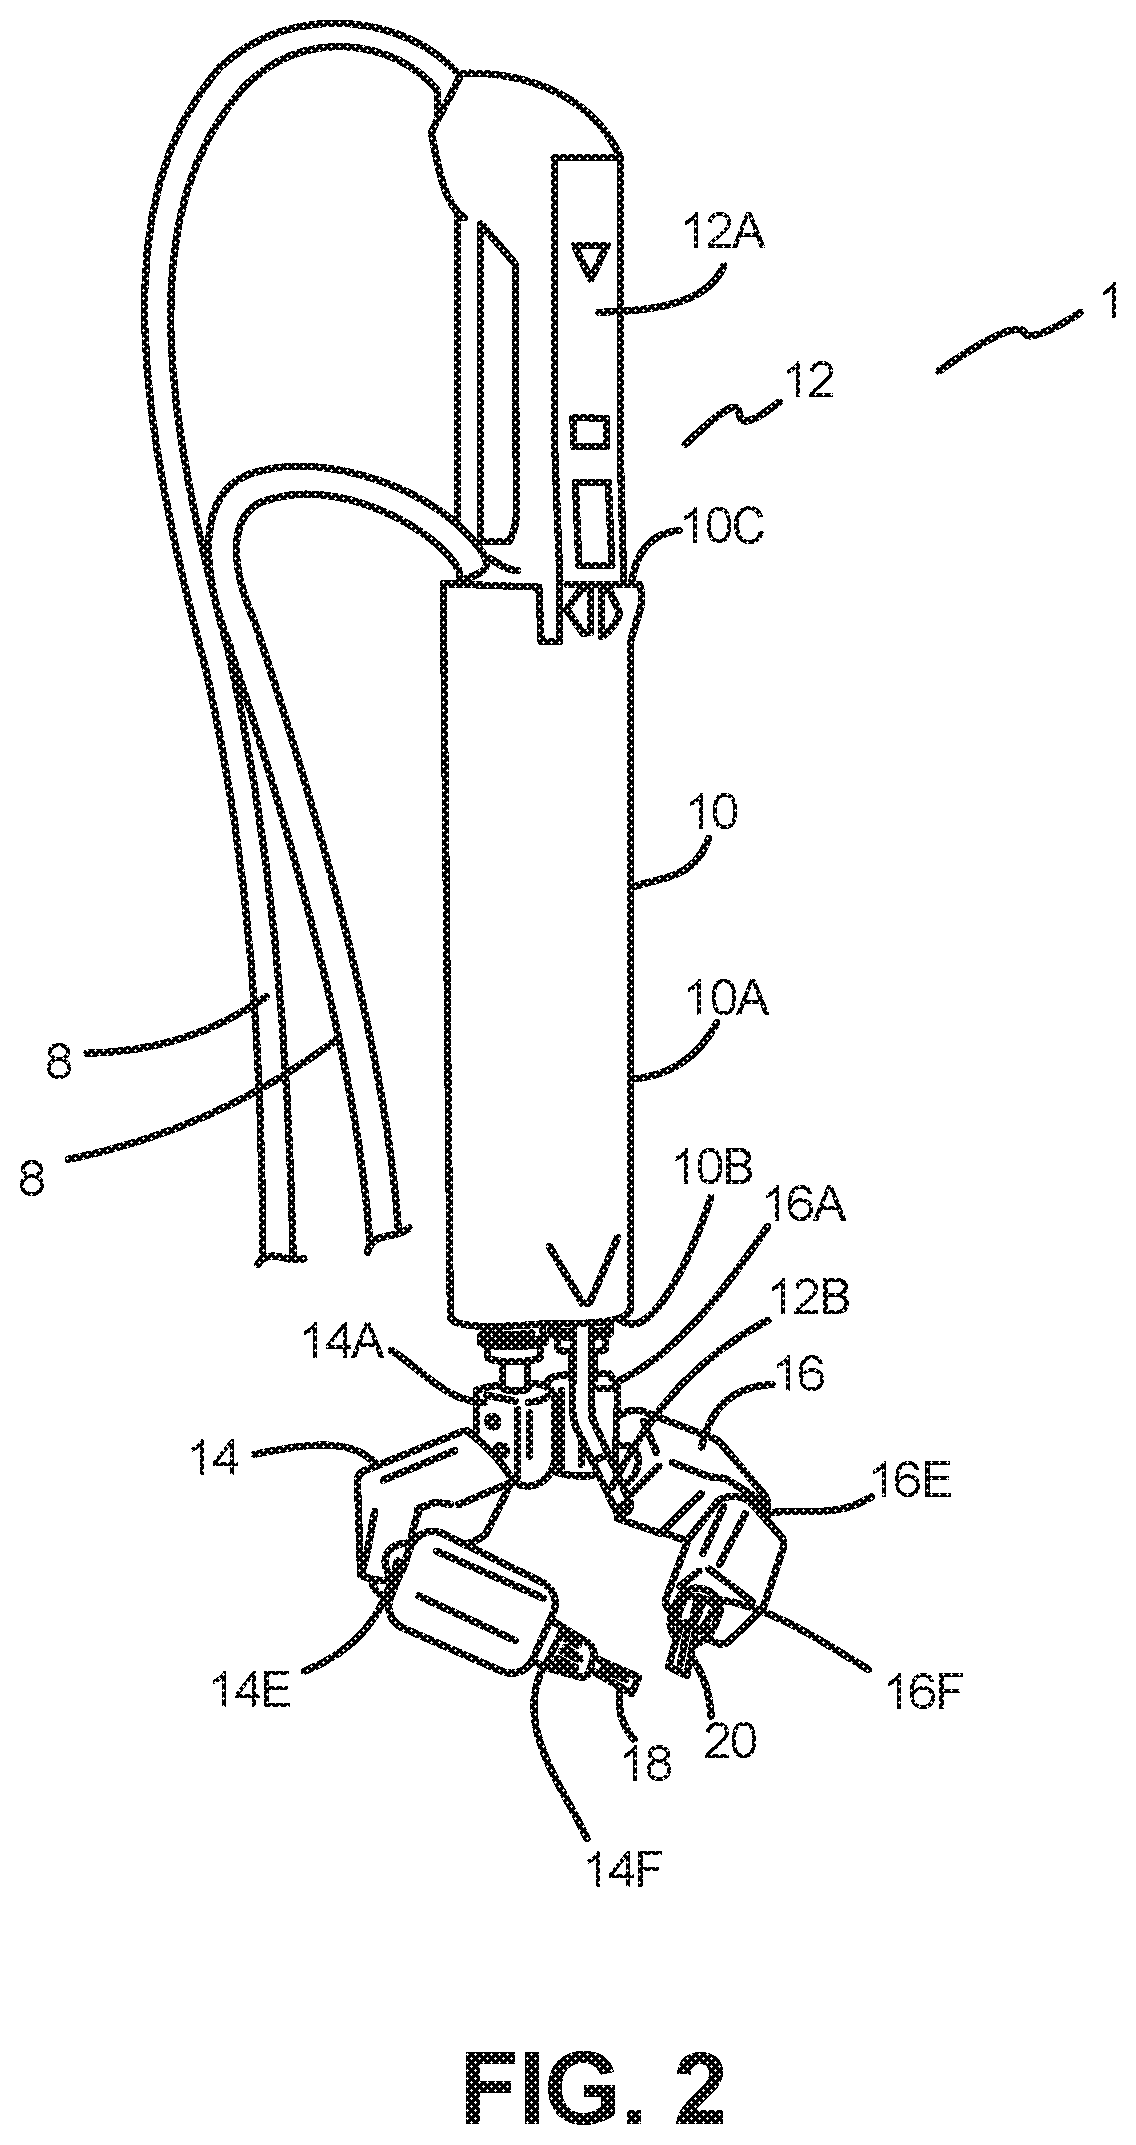 Robotic surgical devices, systems and related methods